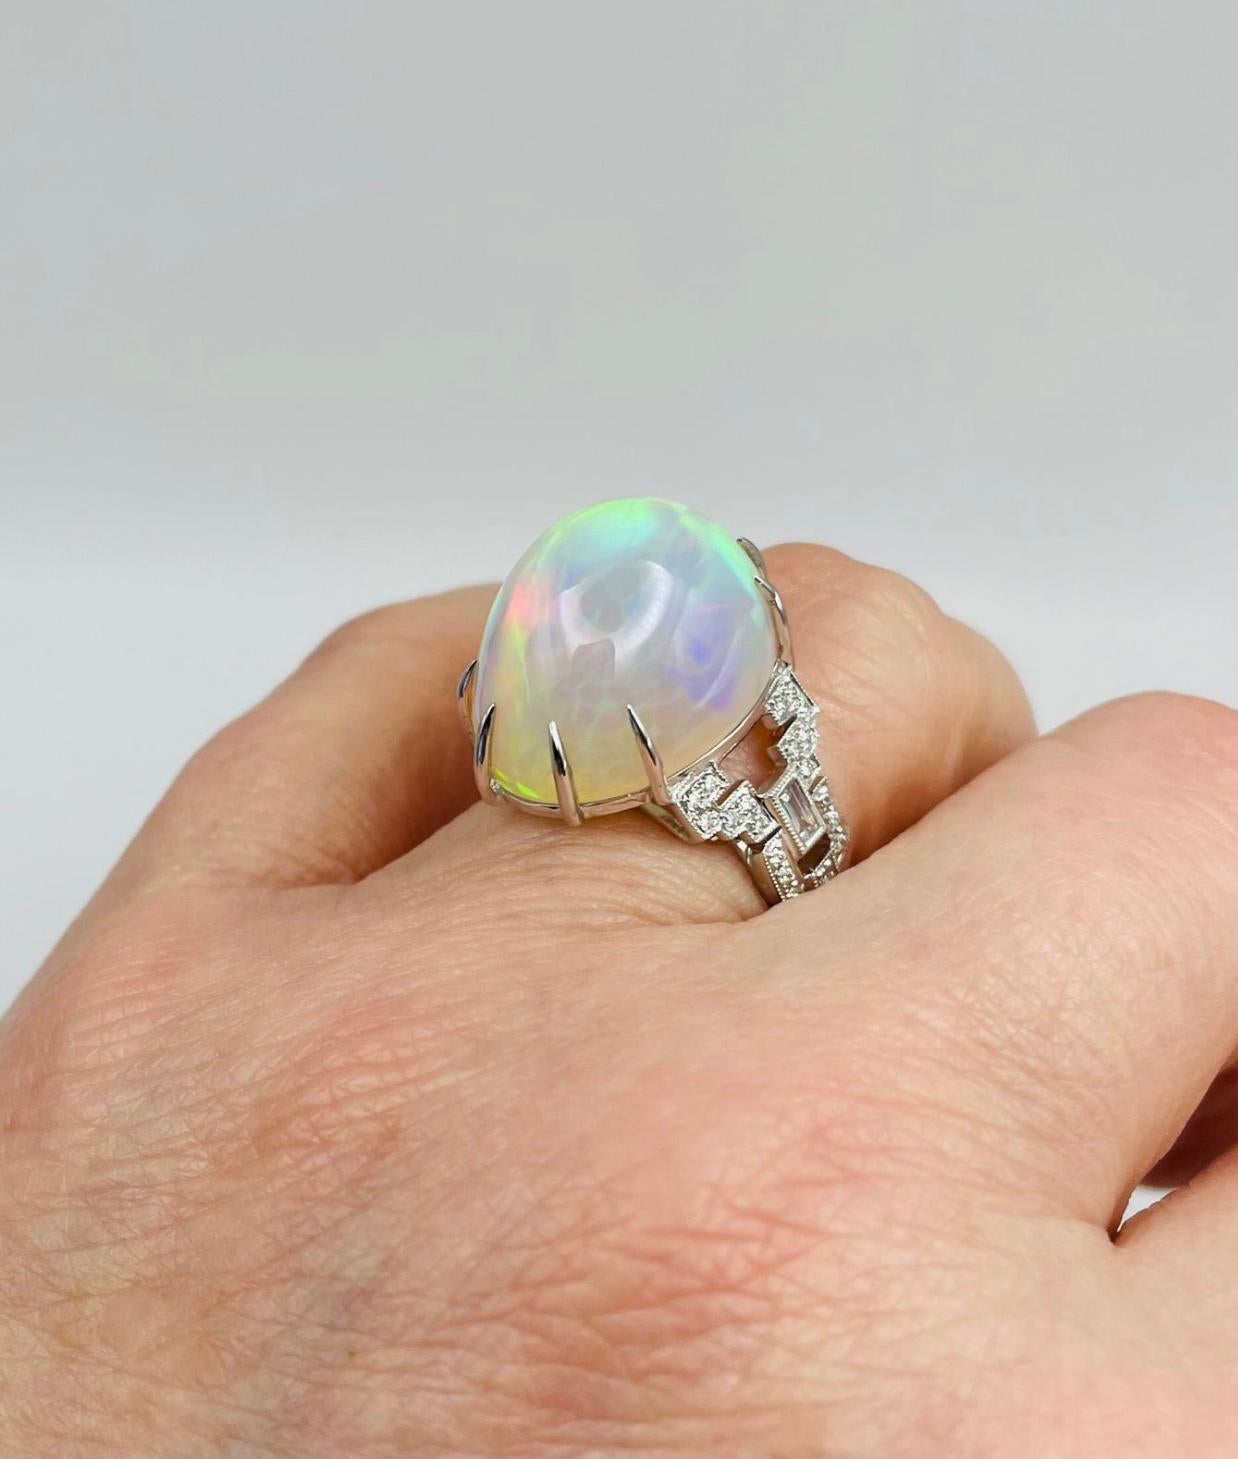 Retro 18kt White Gold Diamond And 15ct Cabochon Opal Ring For Sale 2